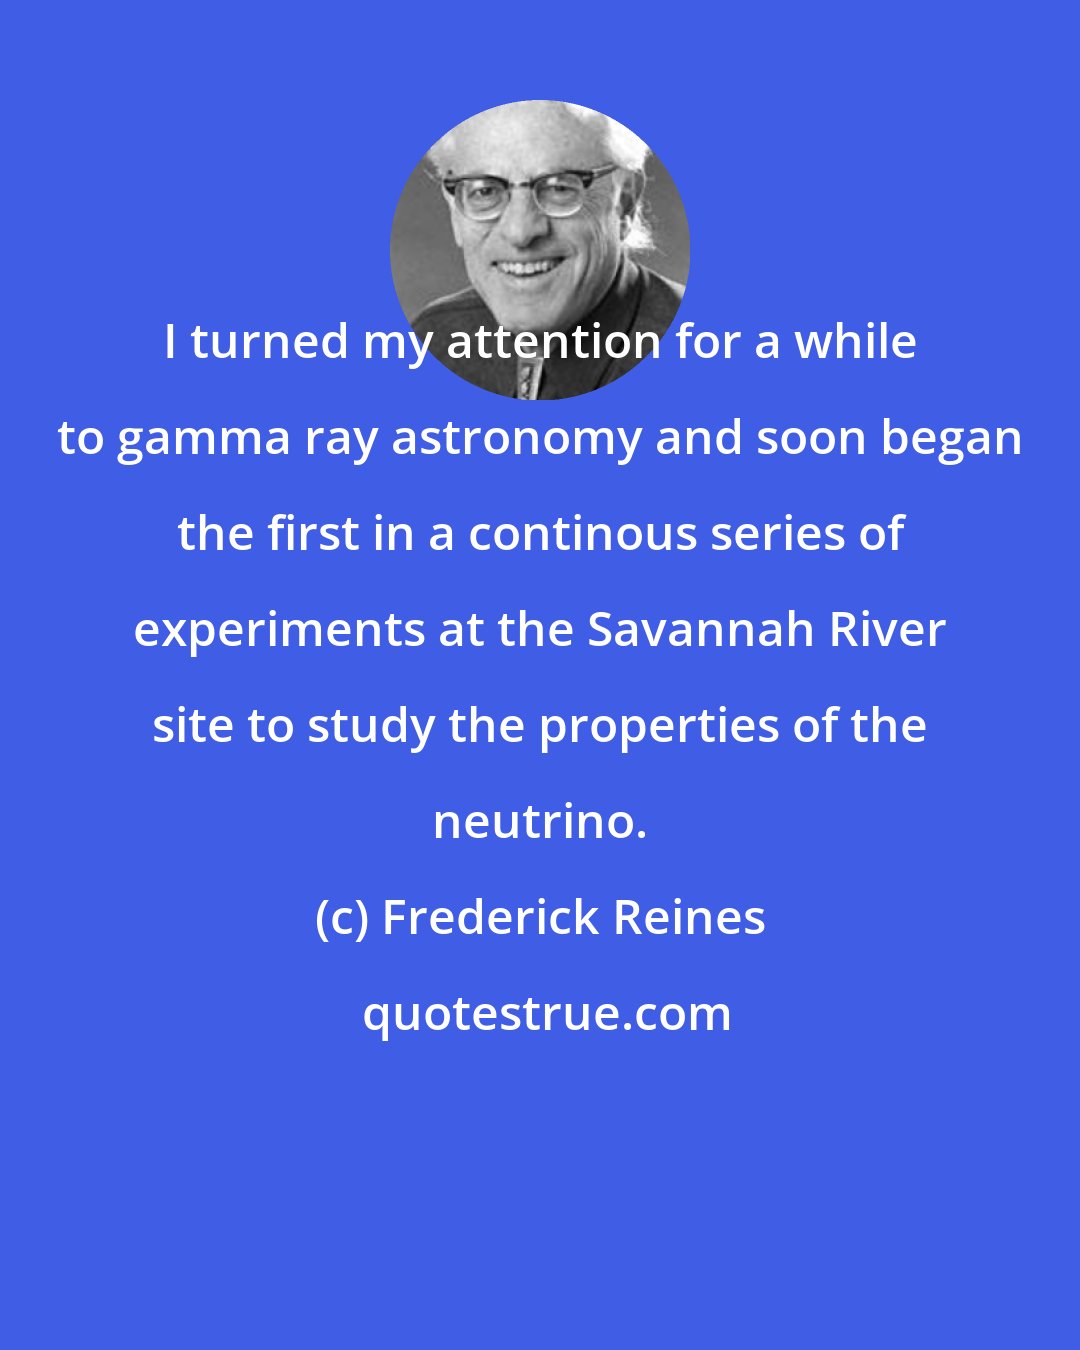 Frederick Reines: I turned my attention for a while to gamma ray astronomy and soon began the first in a continous series of experiments at the Savannah River site to study the properties of the neutrino.